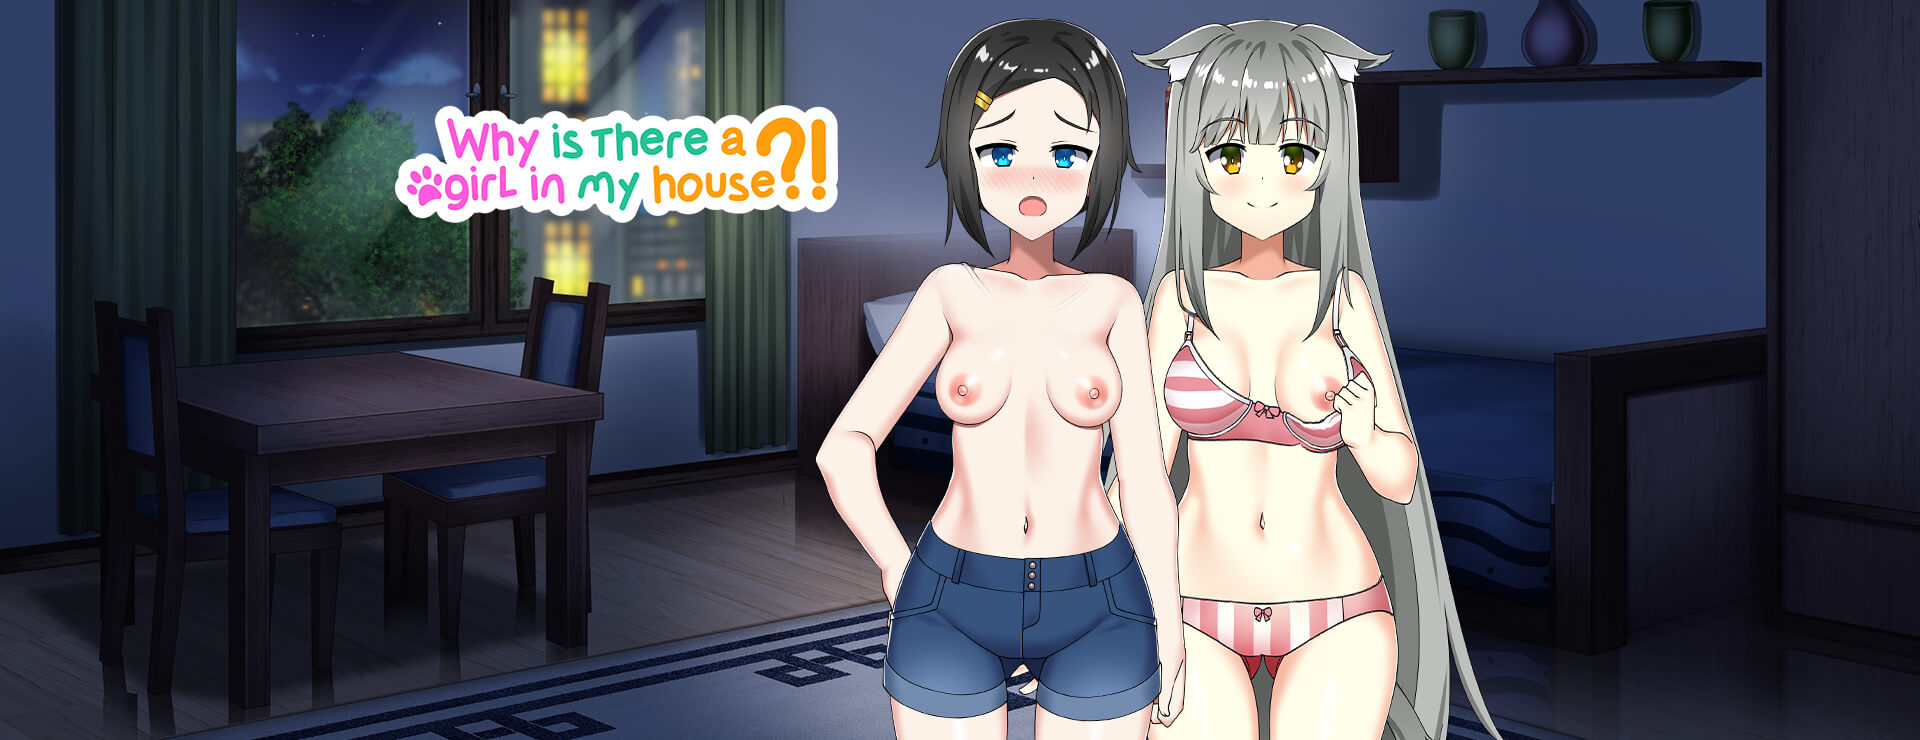 Why Is There A Girl In My House?! - Visual Novel Game